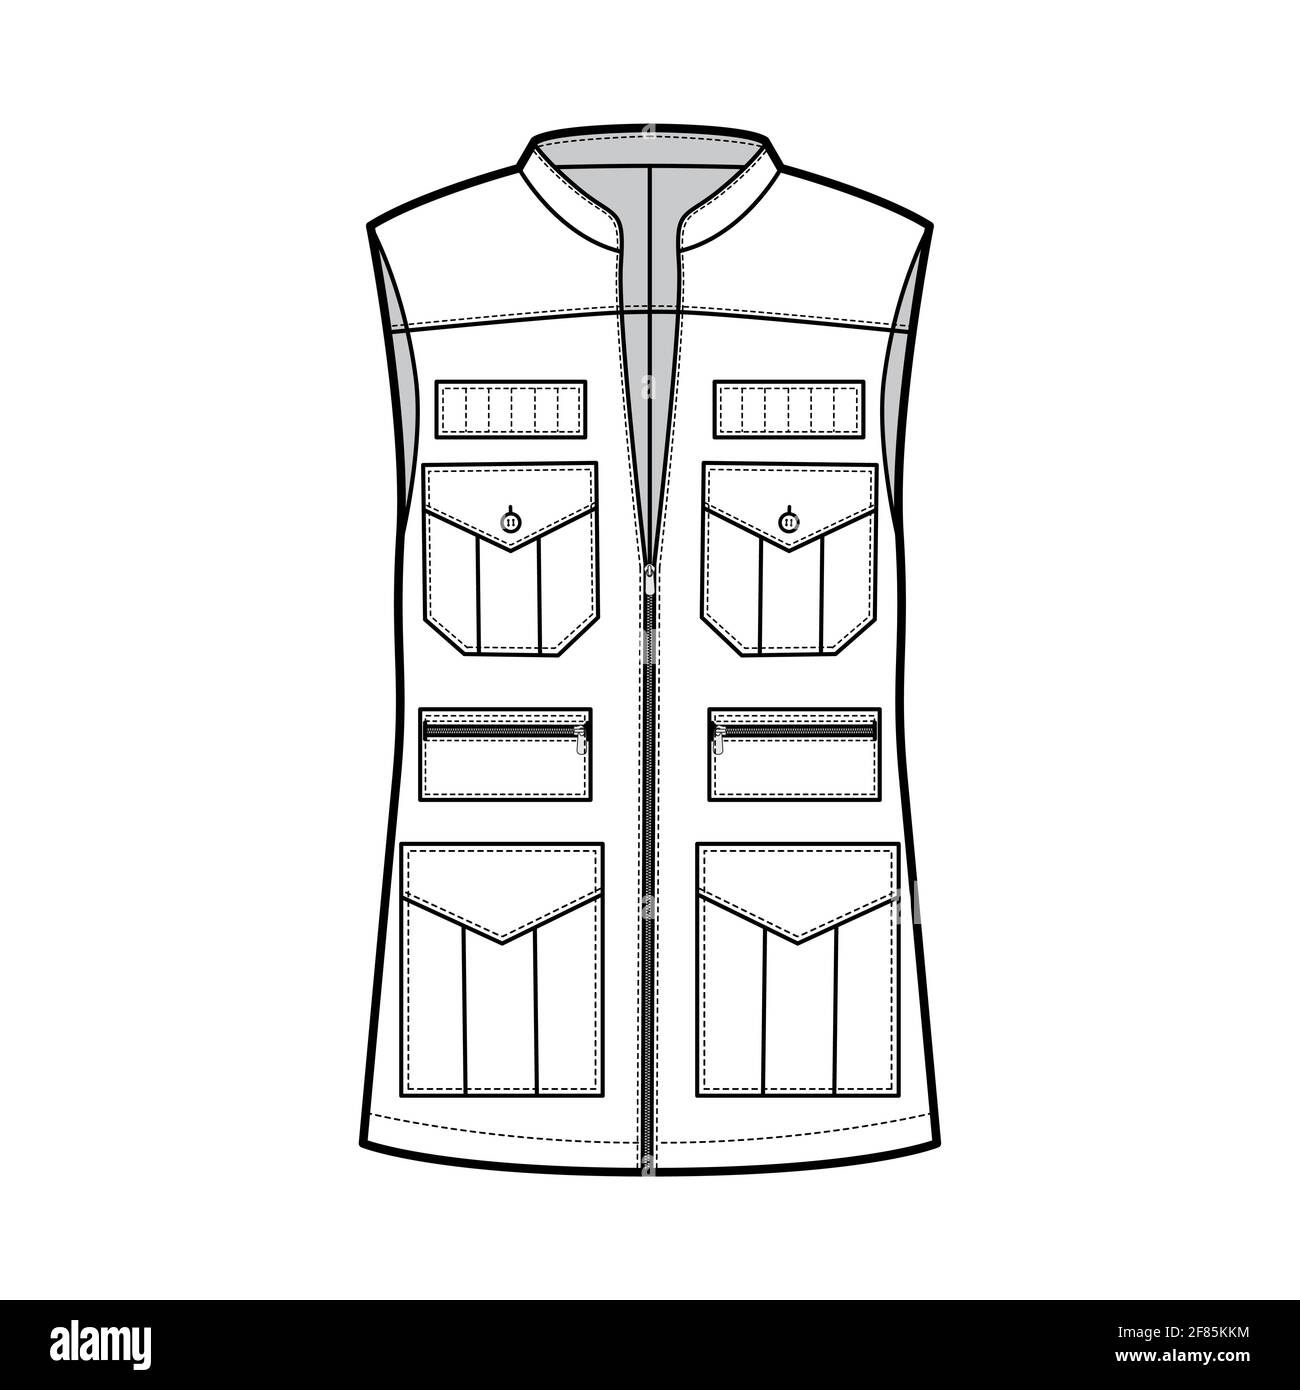 Safari vest waistcoat technical fashion illustration with sleeveless, stand collar, zip-up closure, pockets, oversized body. Flat template front, white color style. Women, men, unisex top CAD mockup Stock Vector